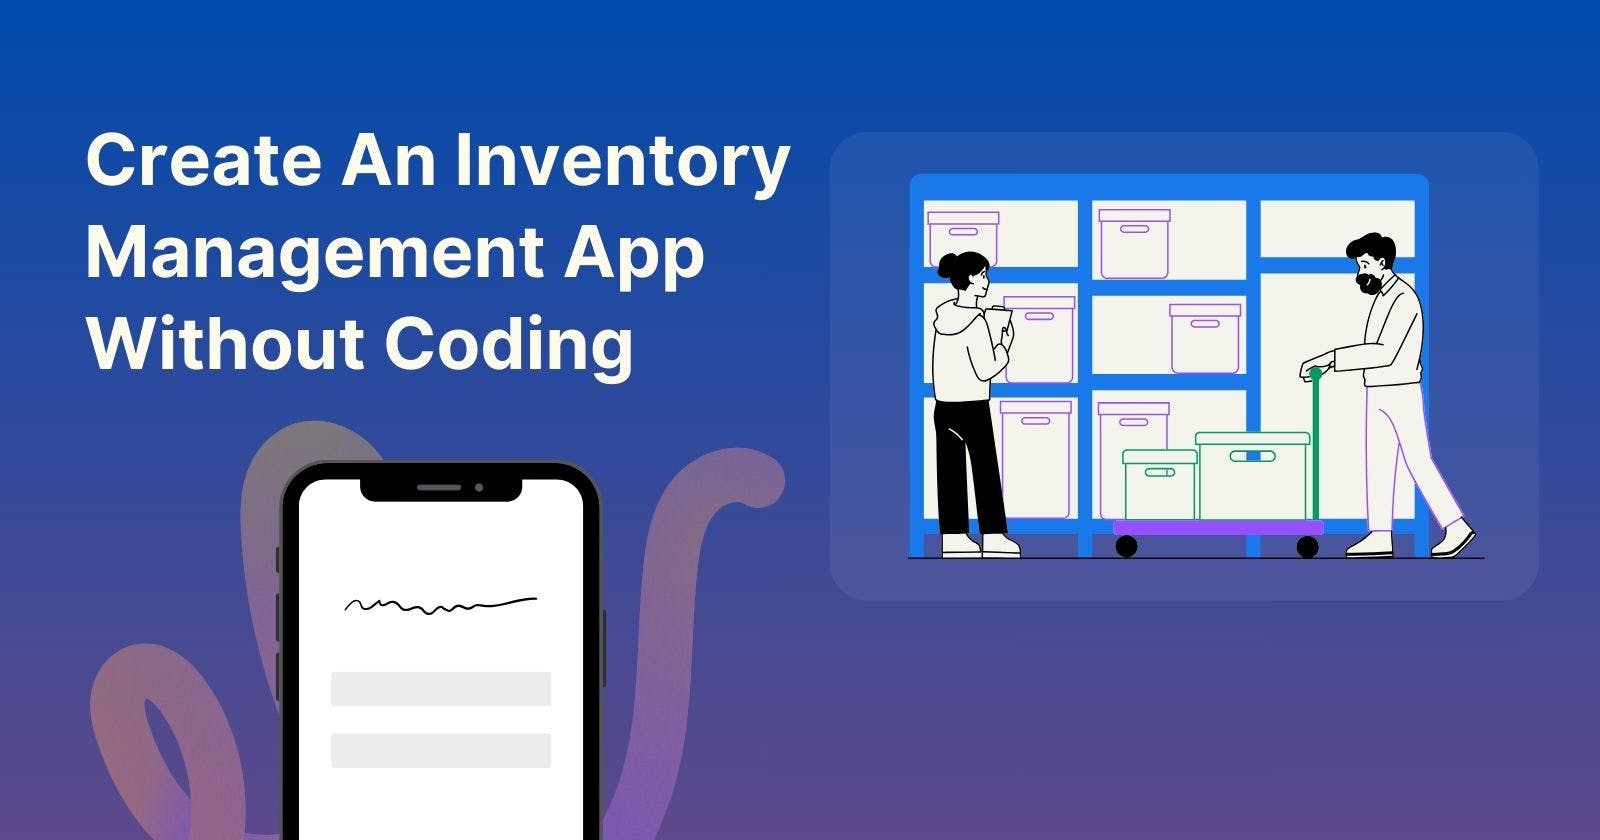 Create an Inventory Management App Without Coding